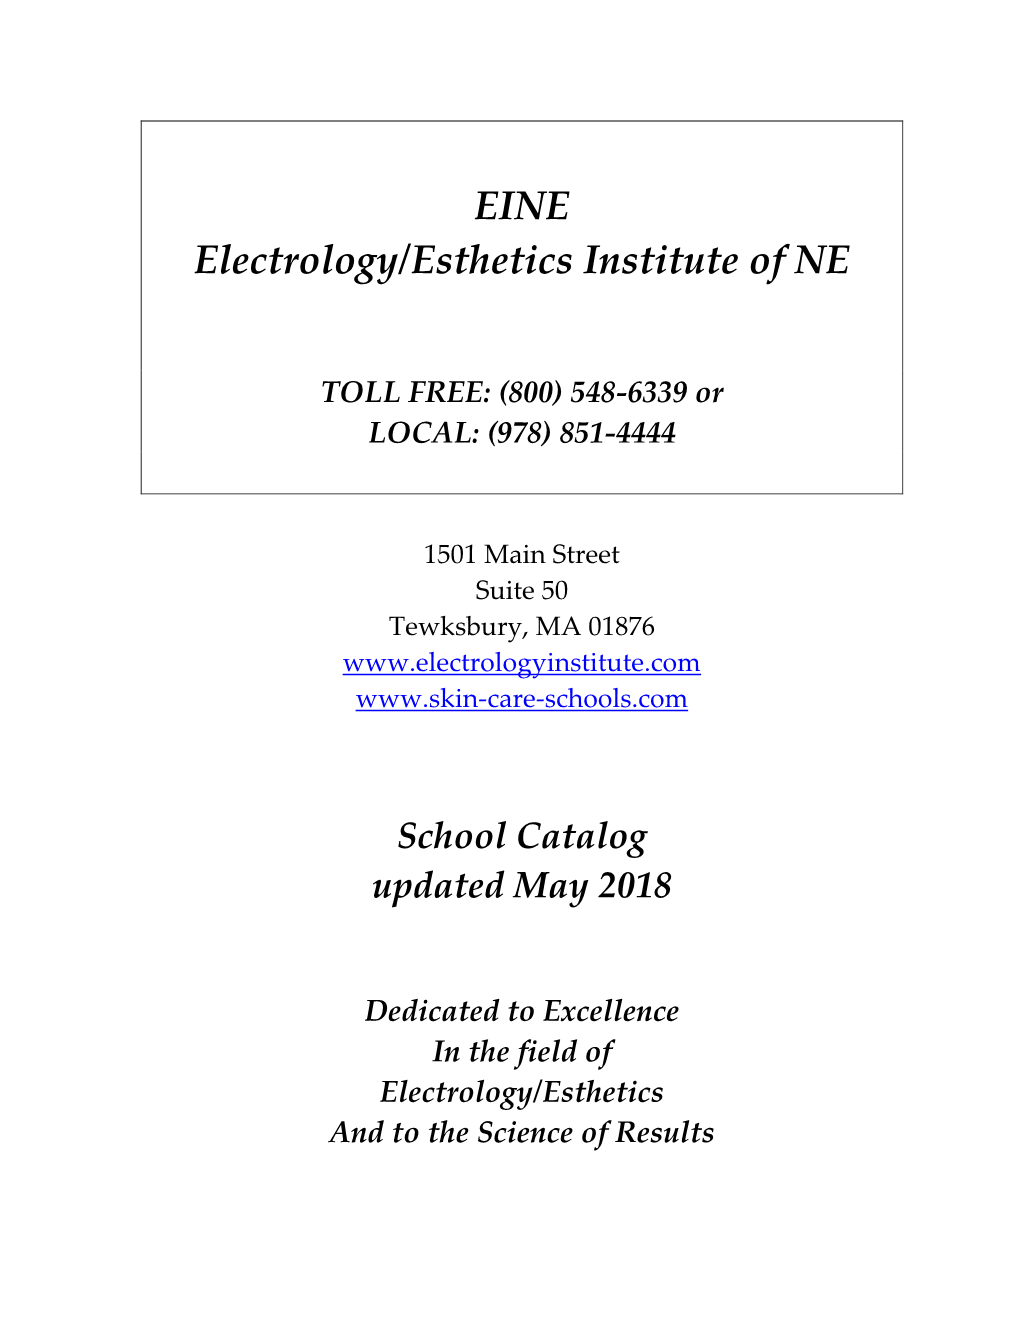 EINE Electrology/Esthetics Institute of NE She Has Such a Great Love and Passion for Electrology and Skin Care